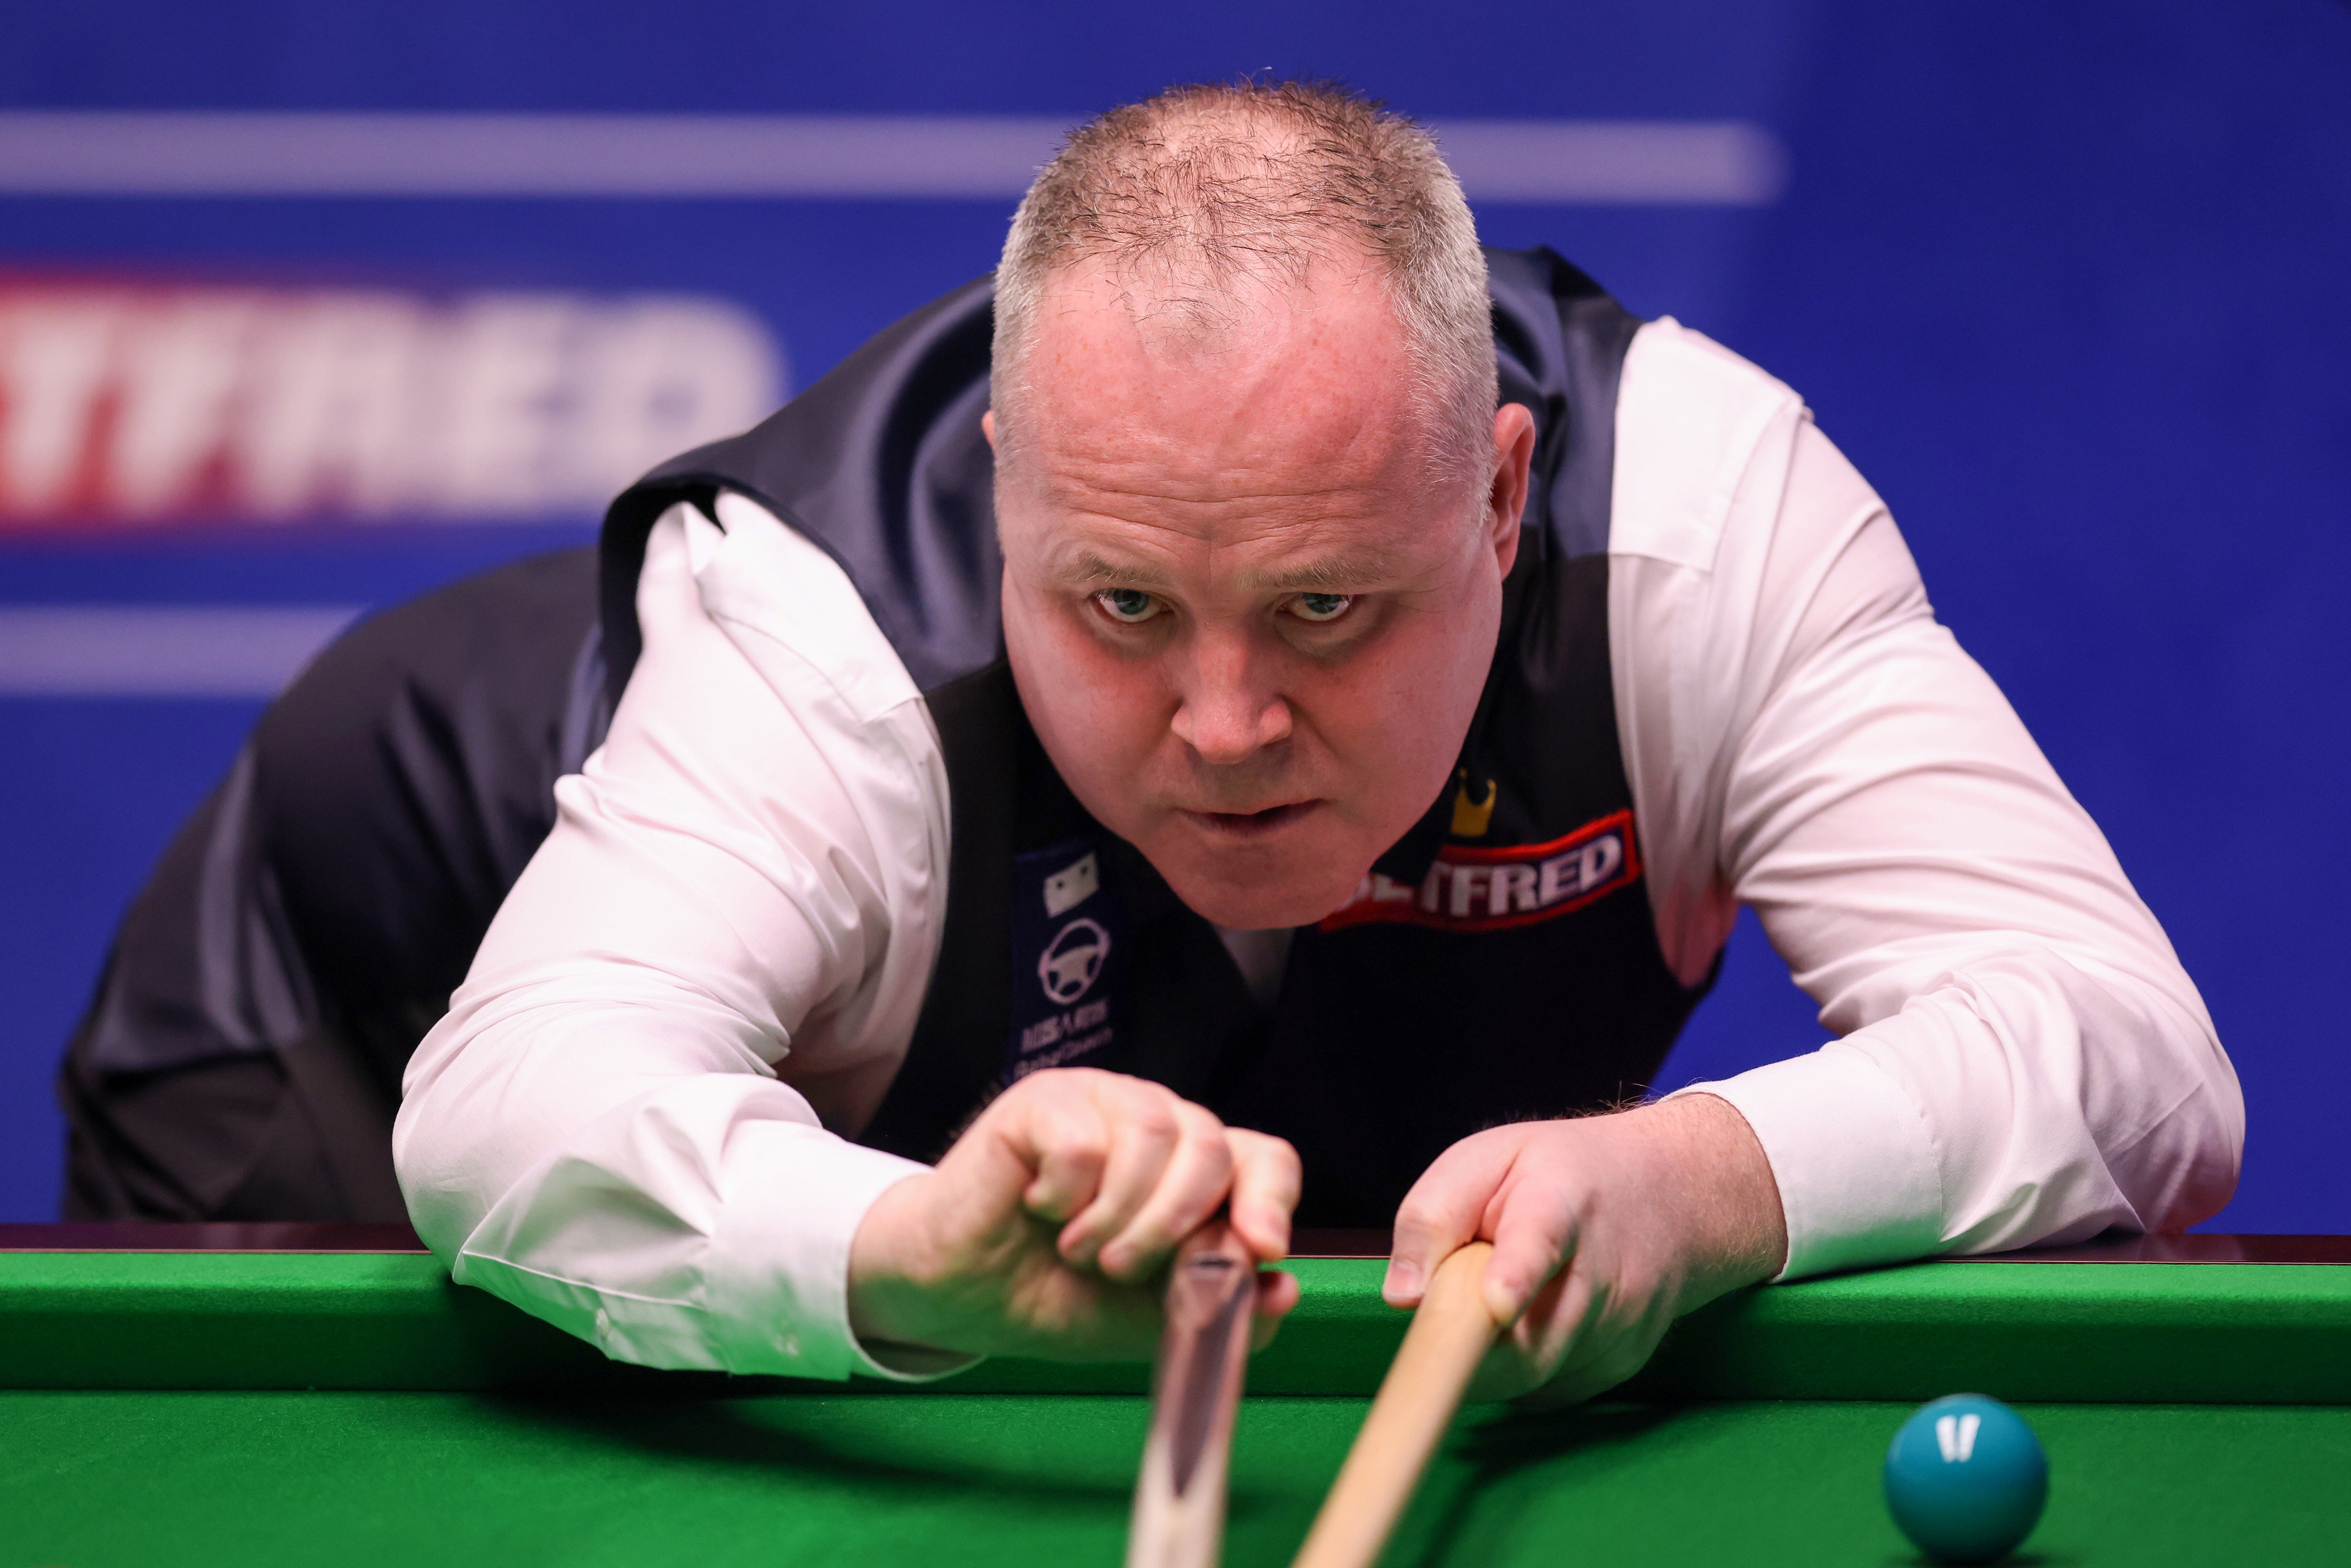 John Higgins romped past Yan Bingtao in the semi-finals of the Northern Ireland Open on Saturday night. Photo: George Wood/Getty Images